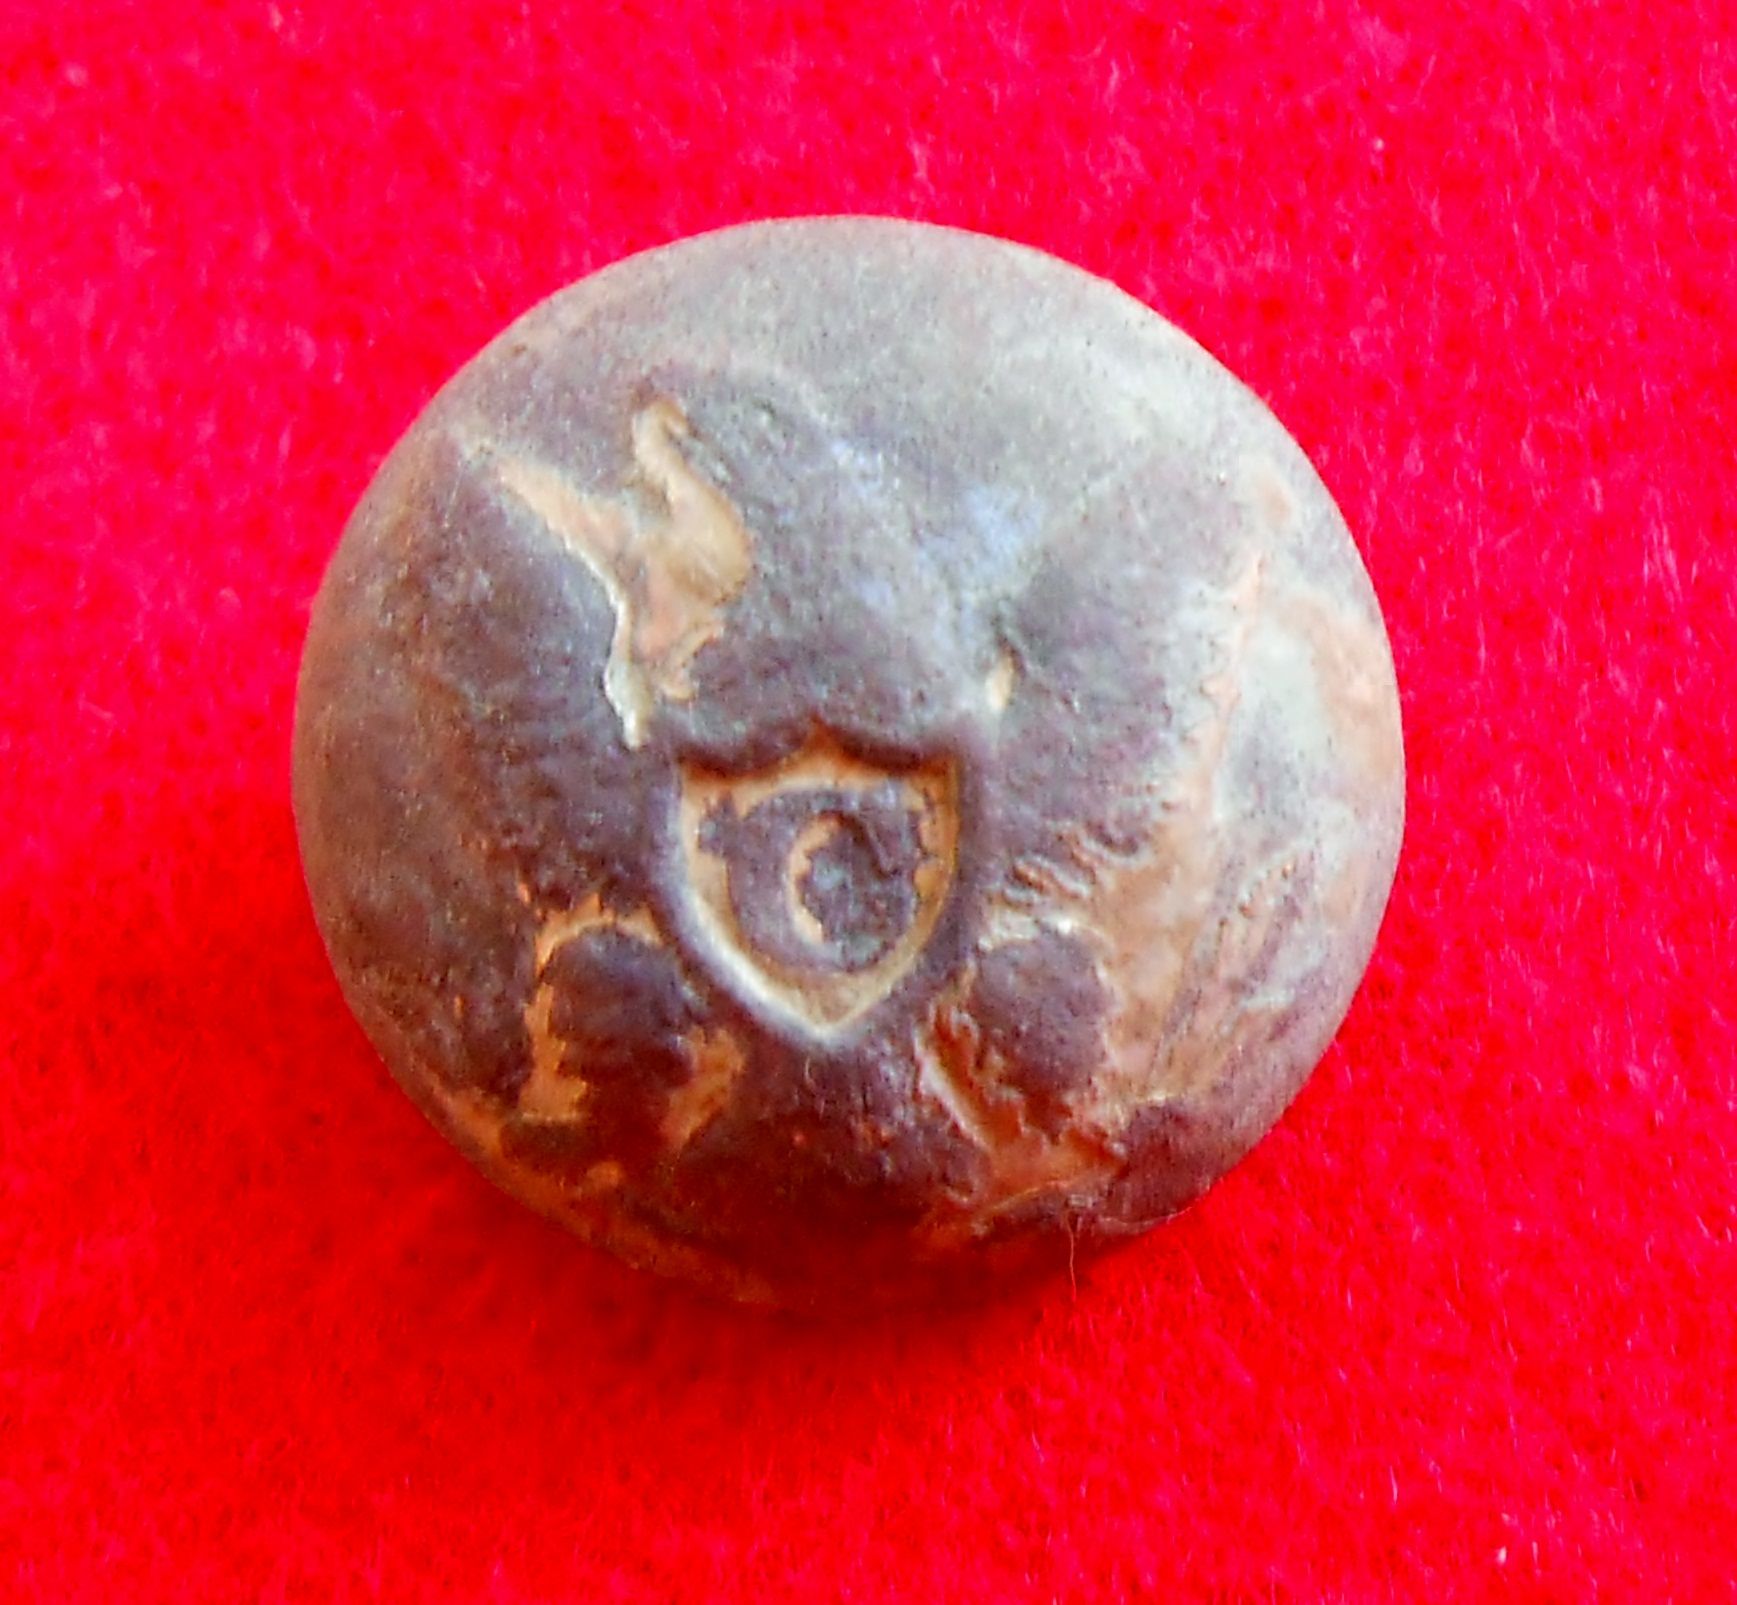 In Oct. 2012, I dug this coat size U.S. Cavalry Officer's button with intact shank and Scovill backmark at a CW camp where the 2nd Michigan Cavalry wa